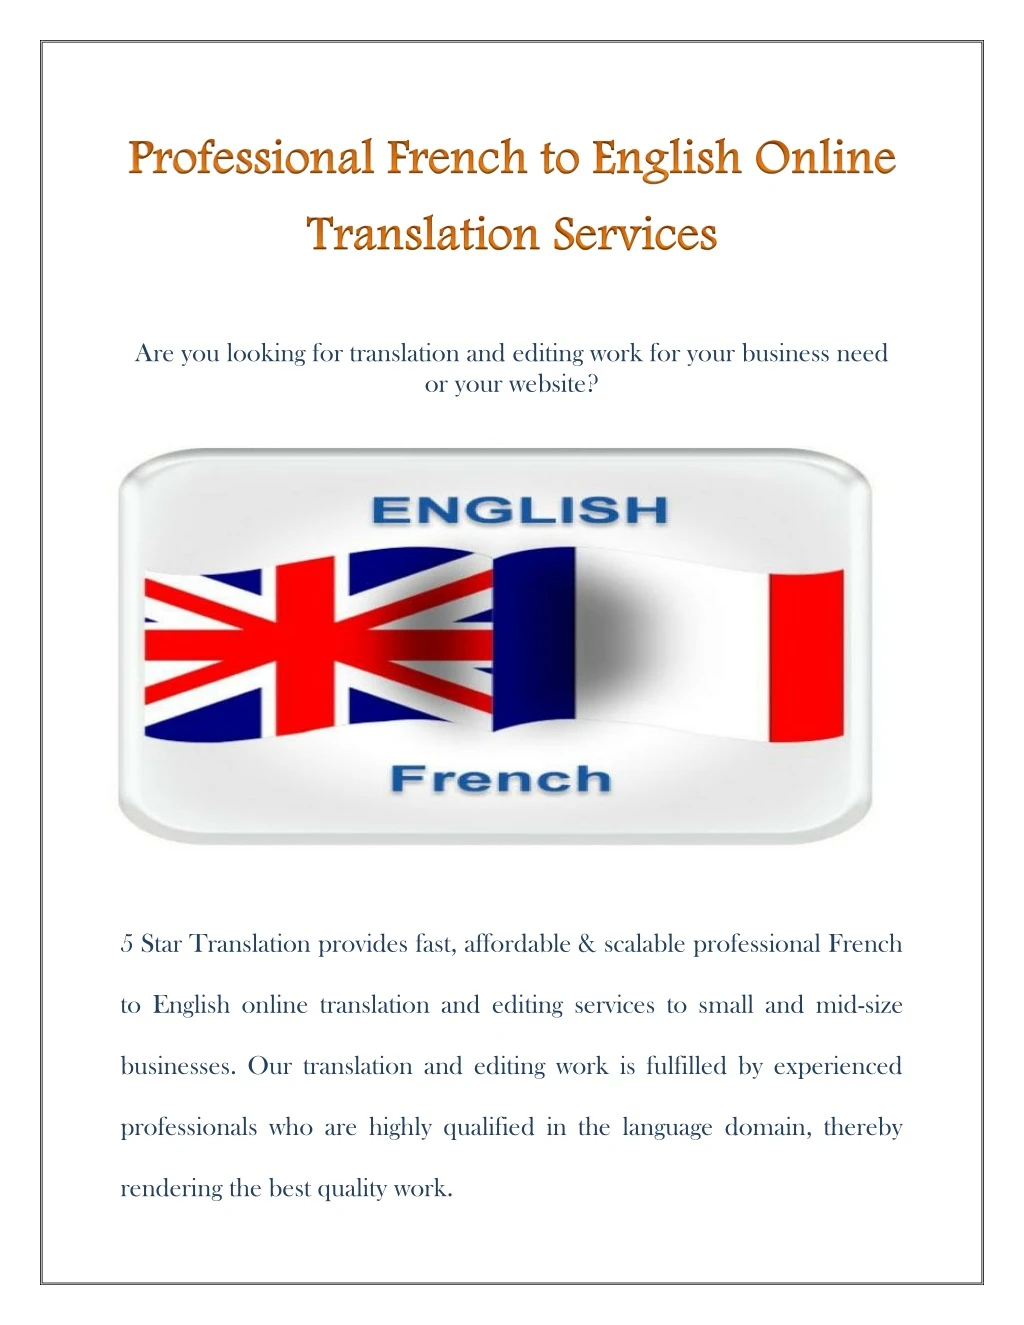 are you looking for translation and editing work